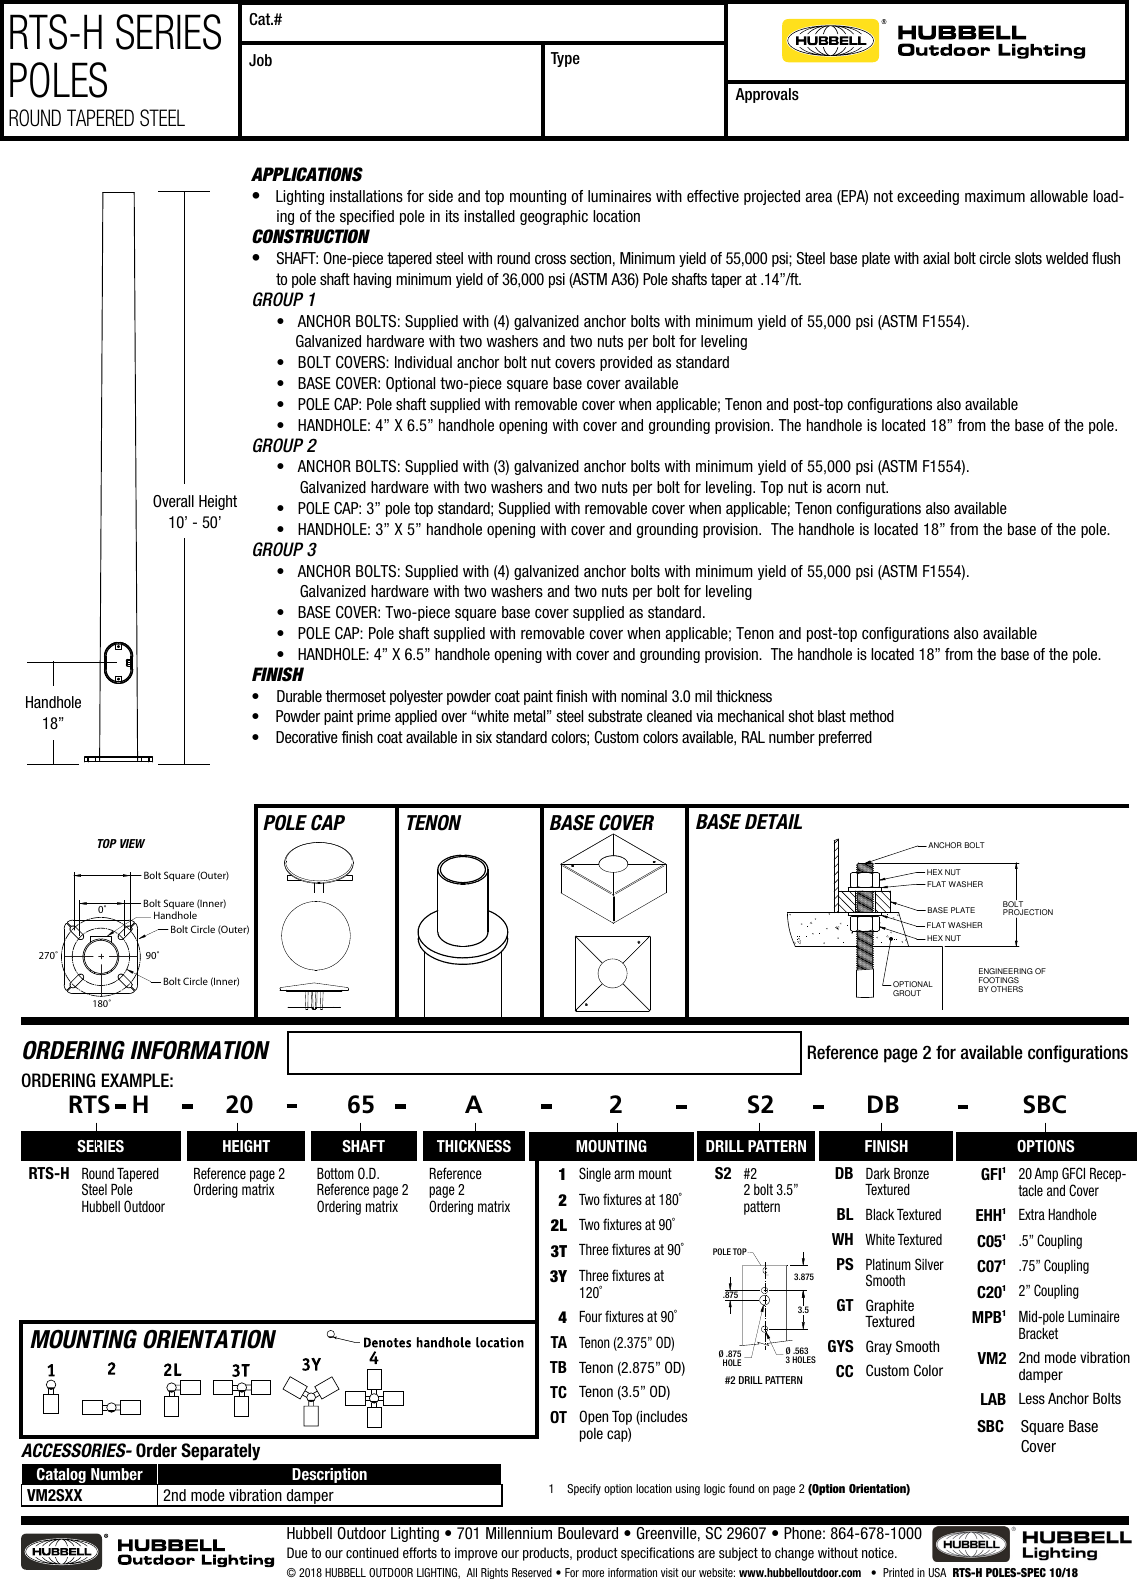 Page 1 of 3 - RTS-H Poles Spec Sheet